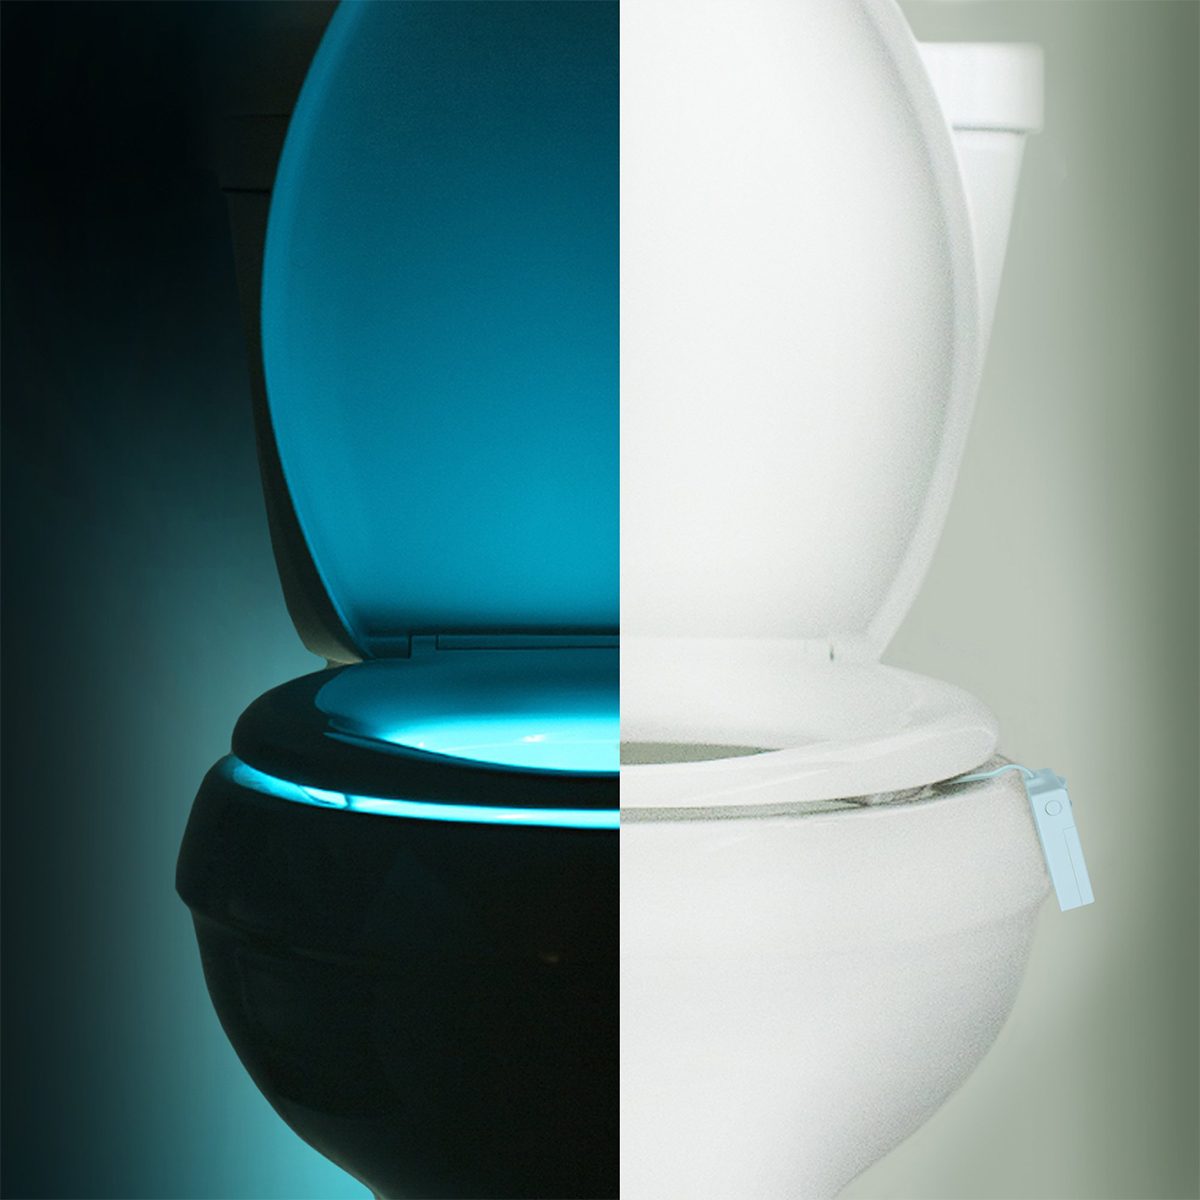 What Is a Toilet Light and What Can It Do For You?